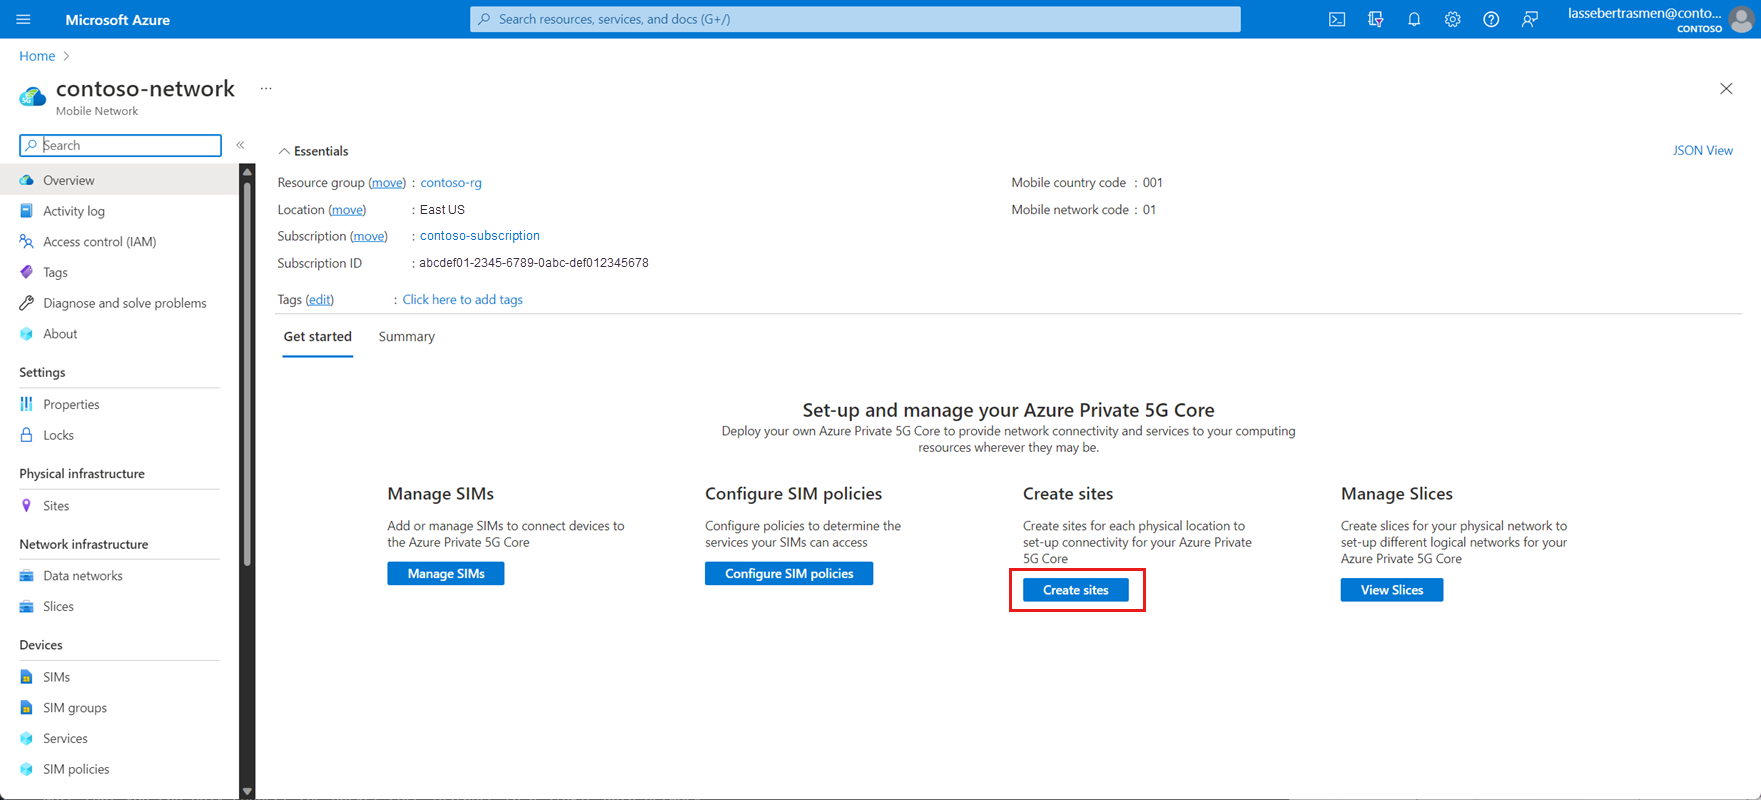 Screenshot of the Azure portal showing the Get started tab, with the Create sites button highlighted.